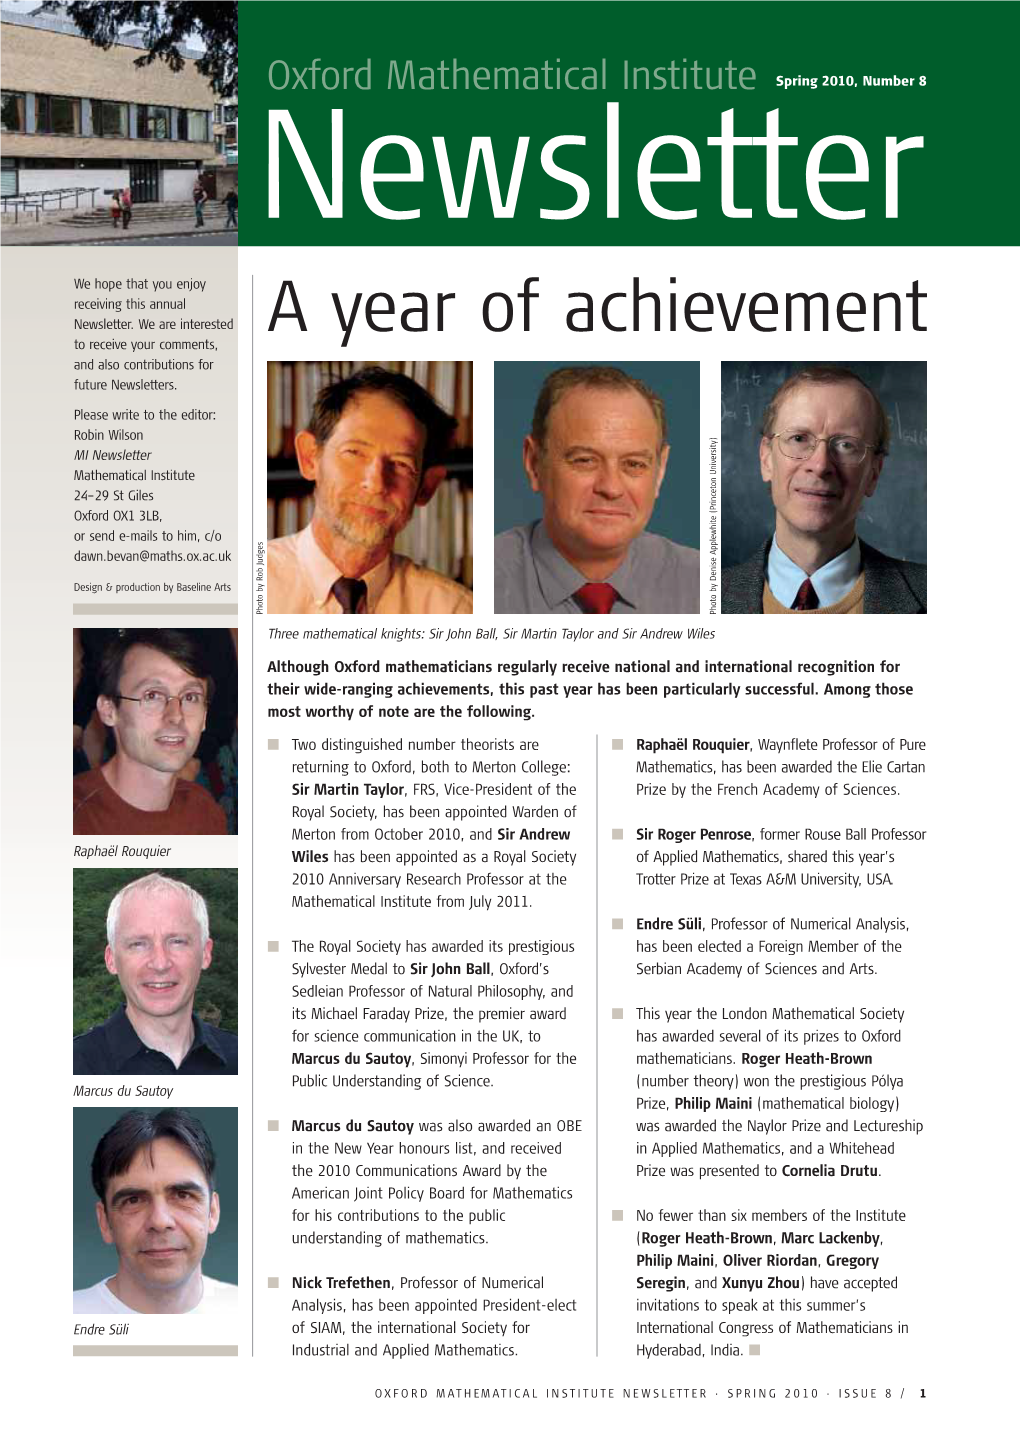 A Year of Achievement to Receive Your Comments, and Also Contributions for Future Newsletters